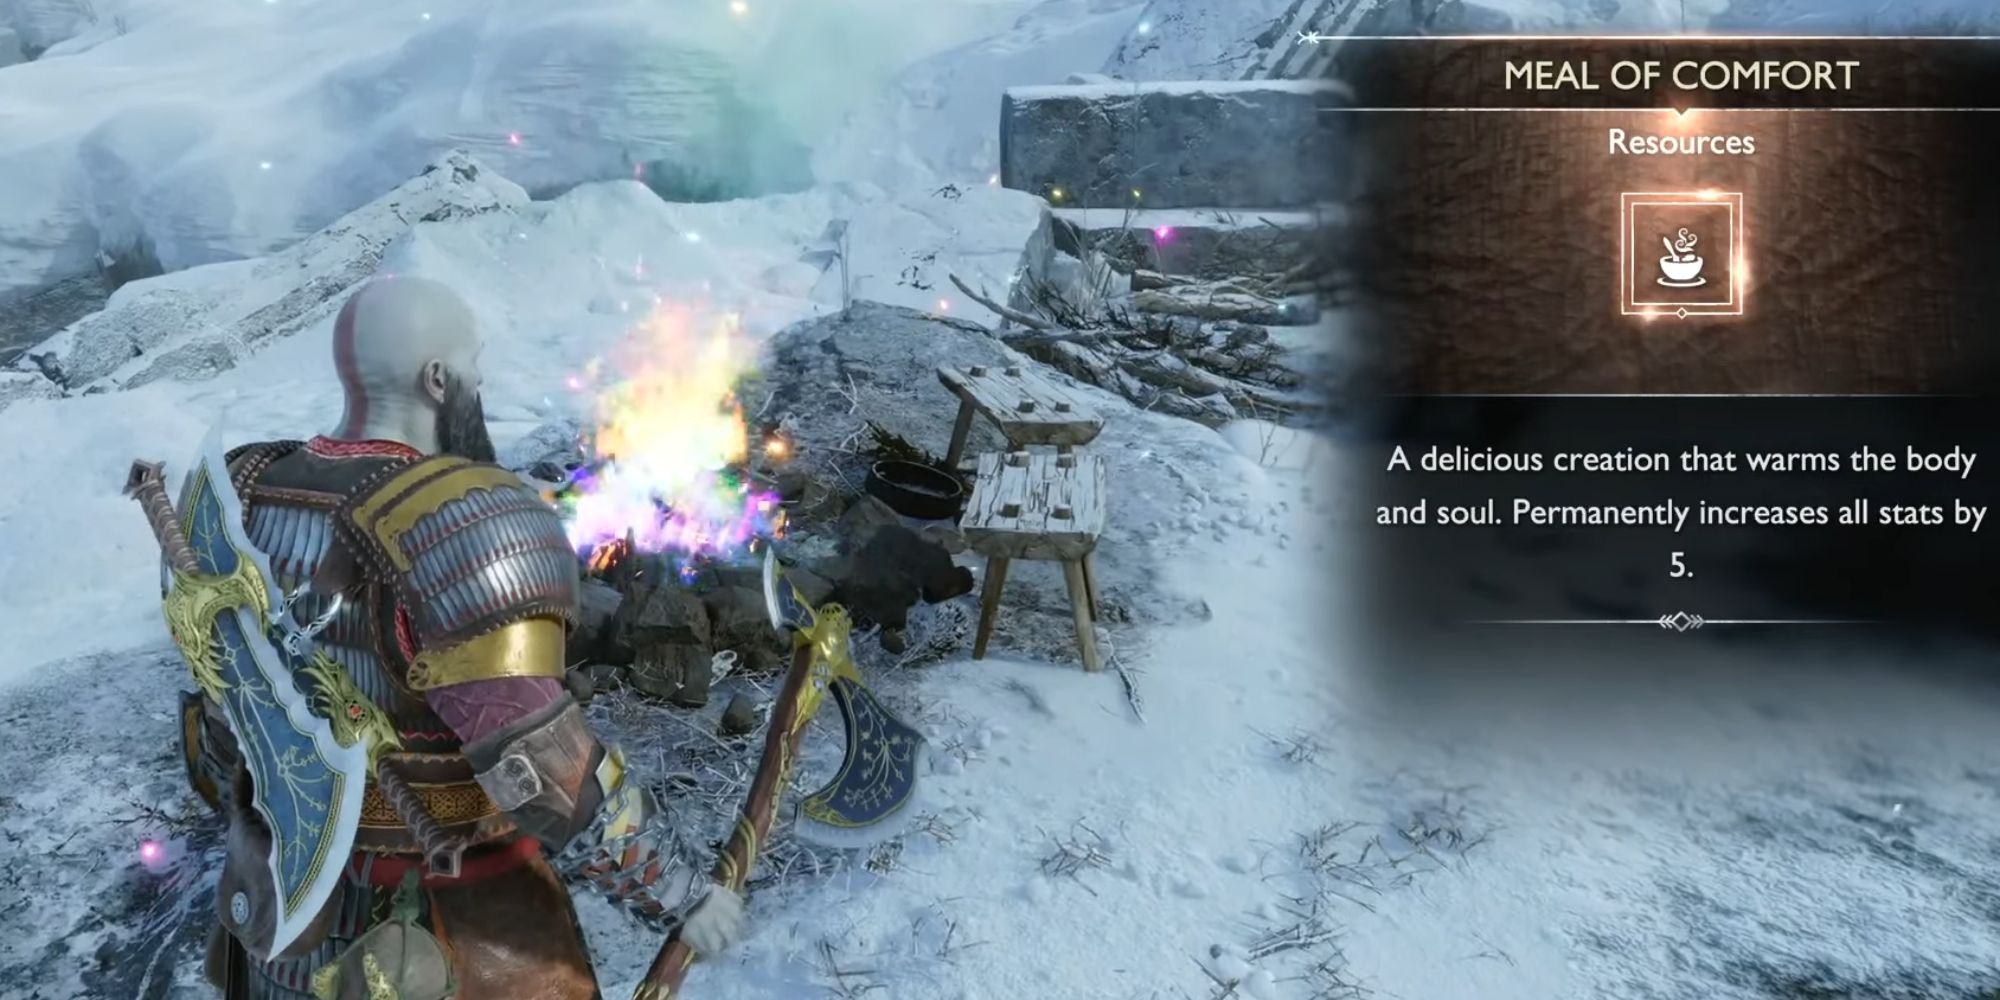 Kratos is holding his axe in his right hand with a fire of various colors burning bright in front of him. On the right is the reward the player has just earned for completing a side quest.